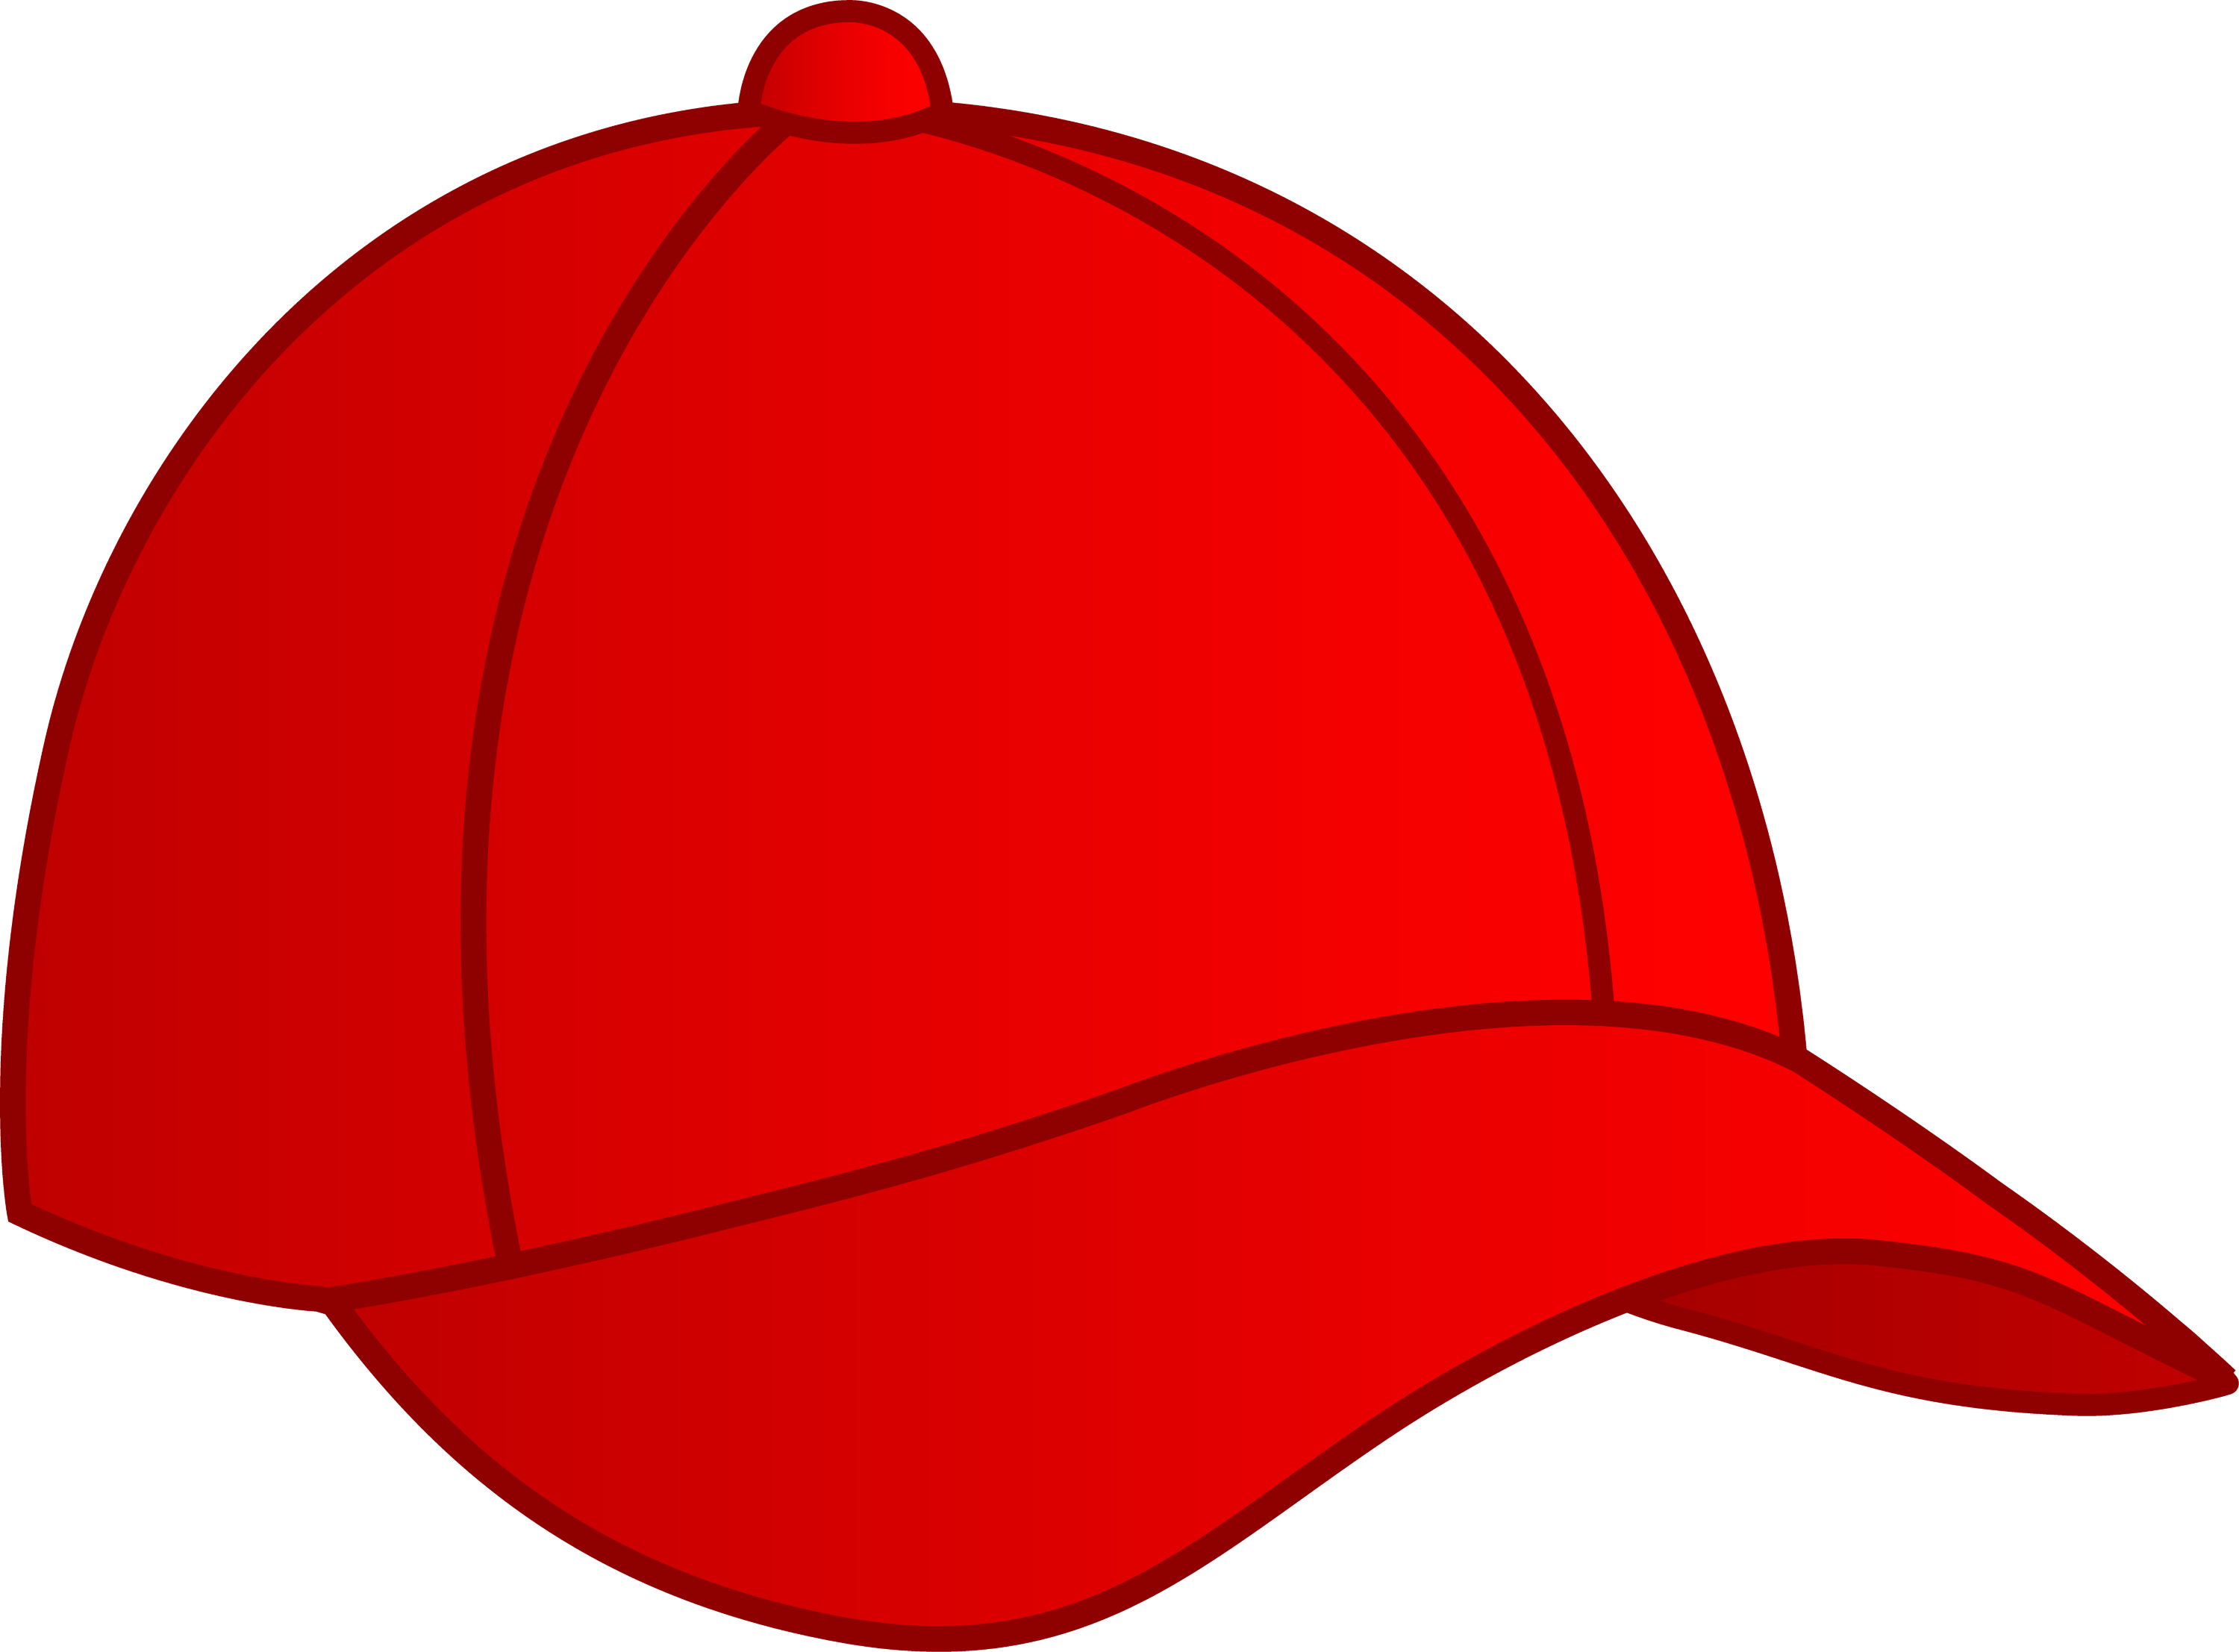 clipart of hats free - photo #17